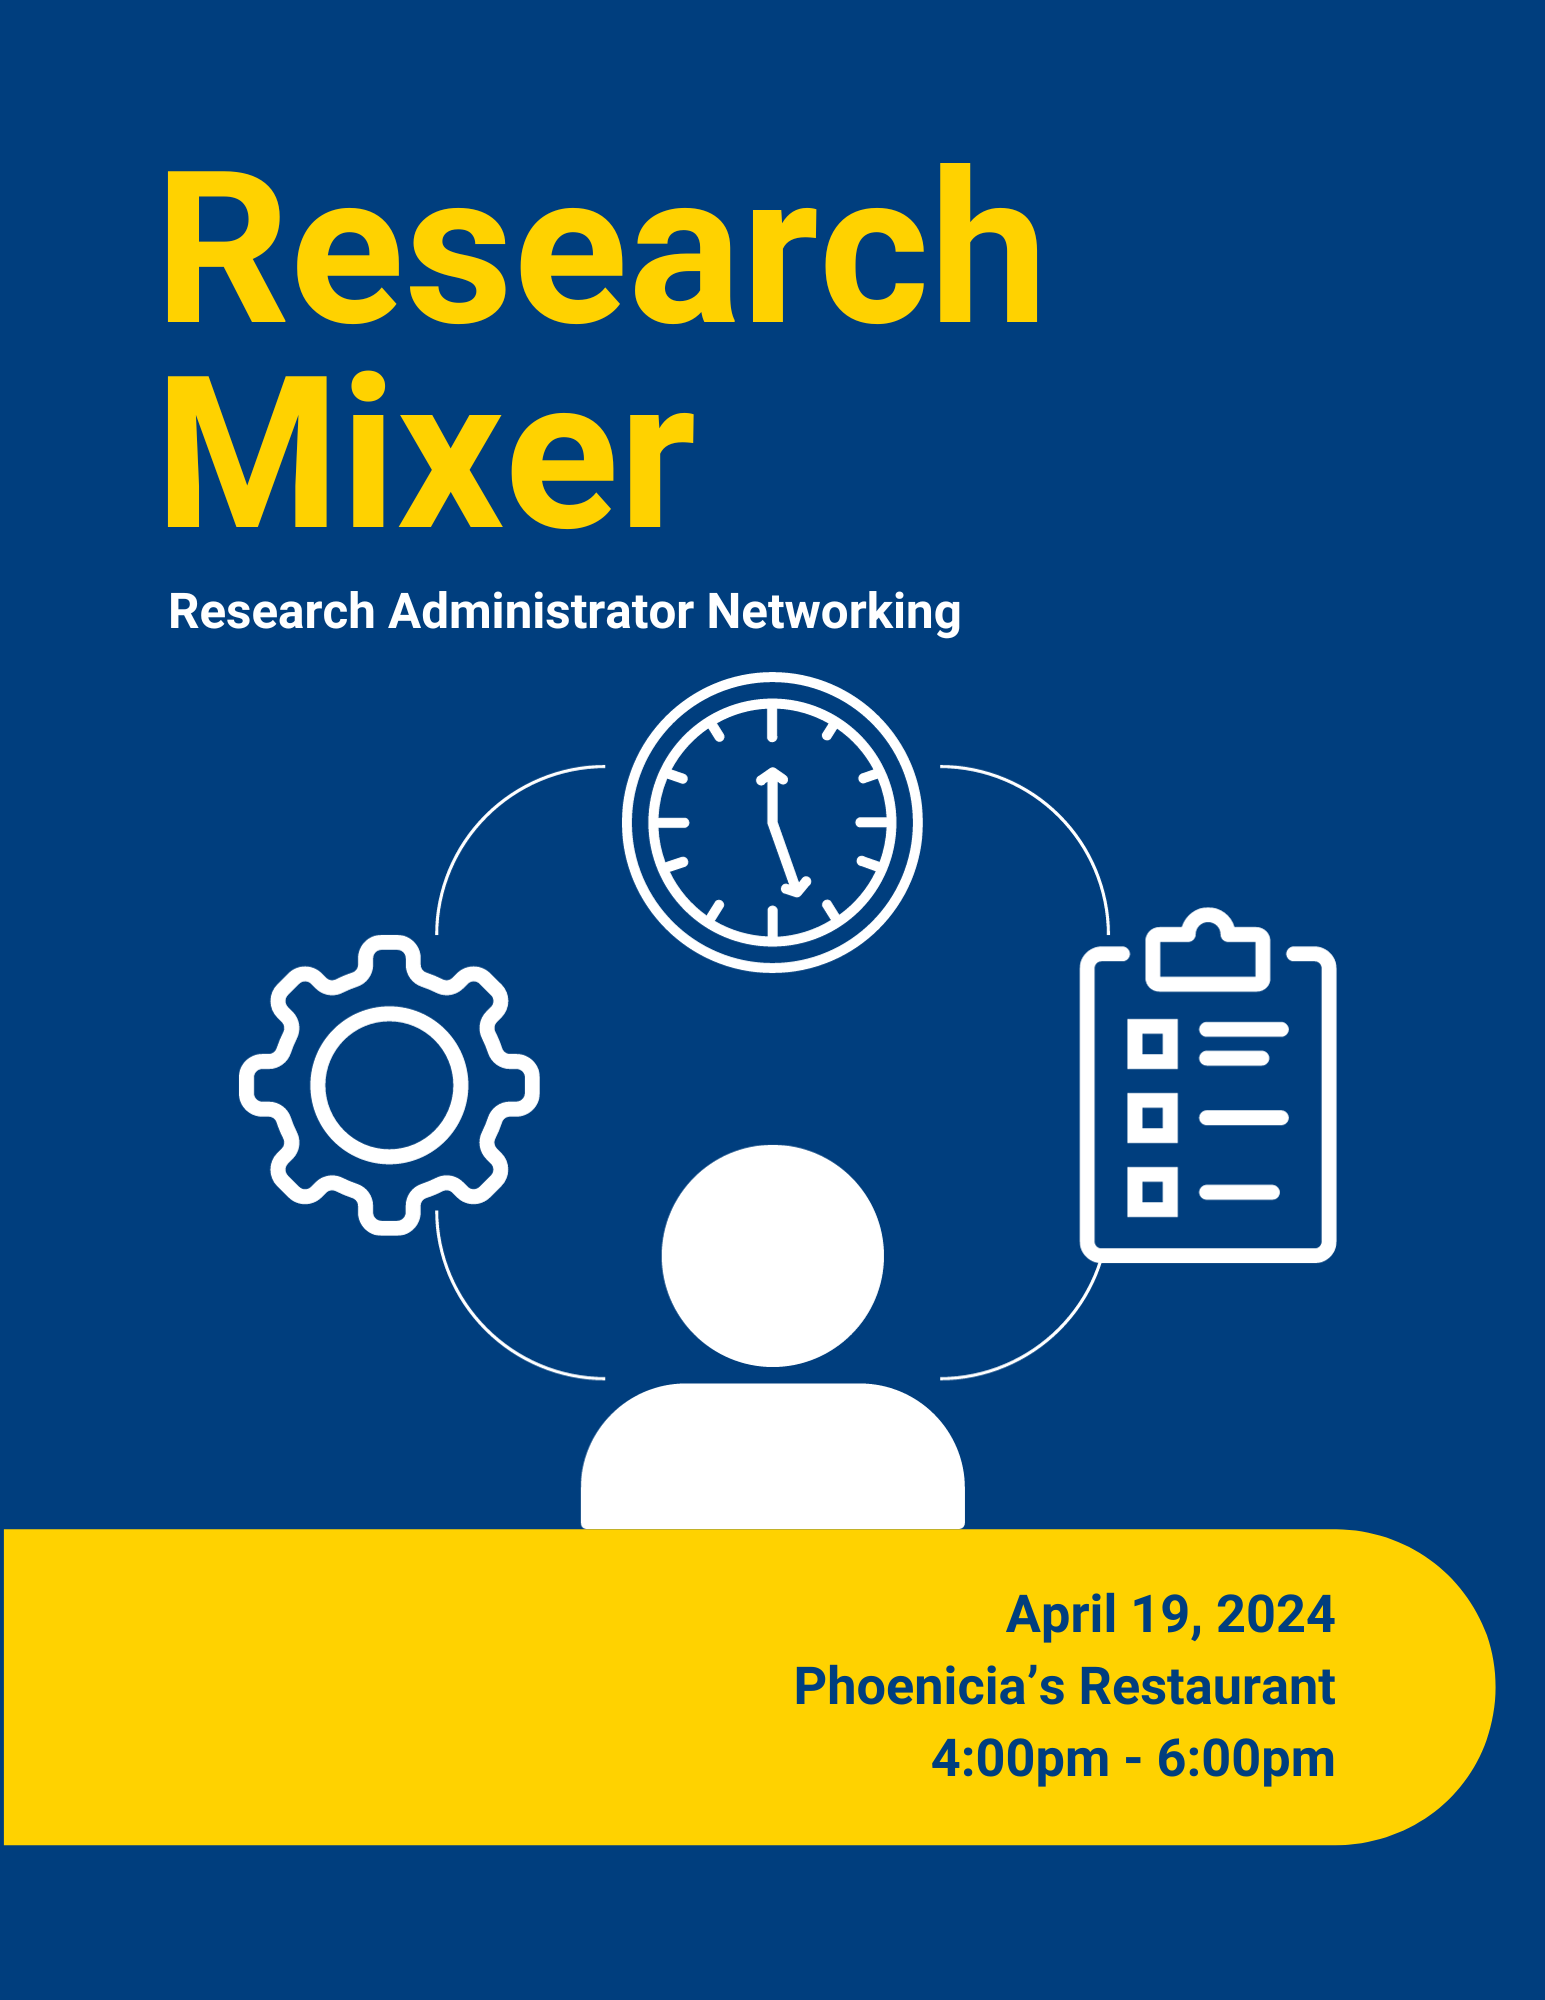 Research Mixer- Research Administrator Networking